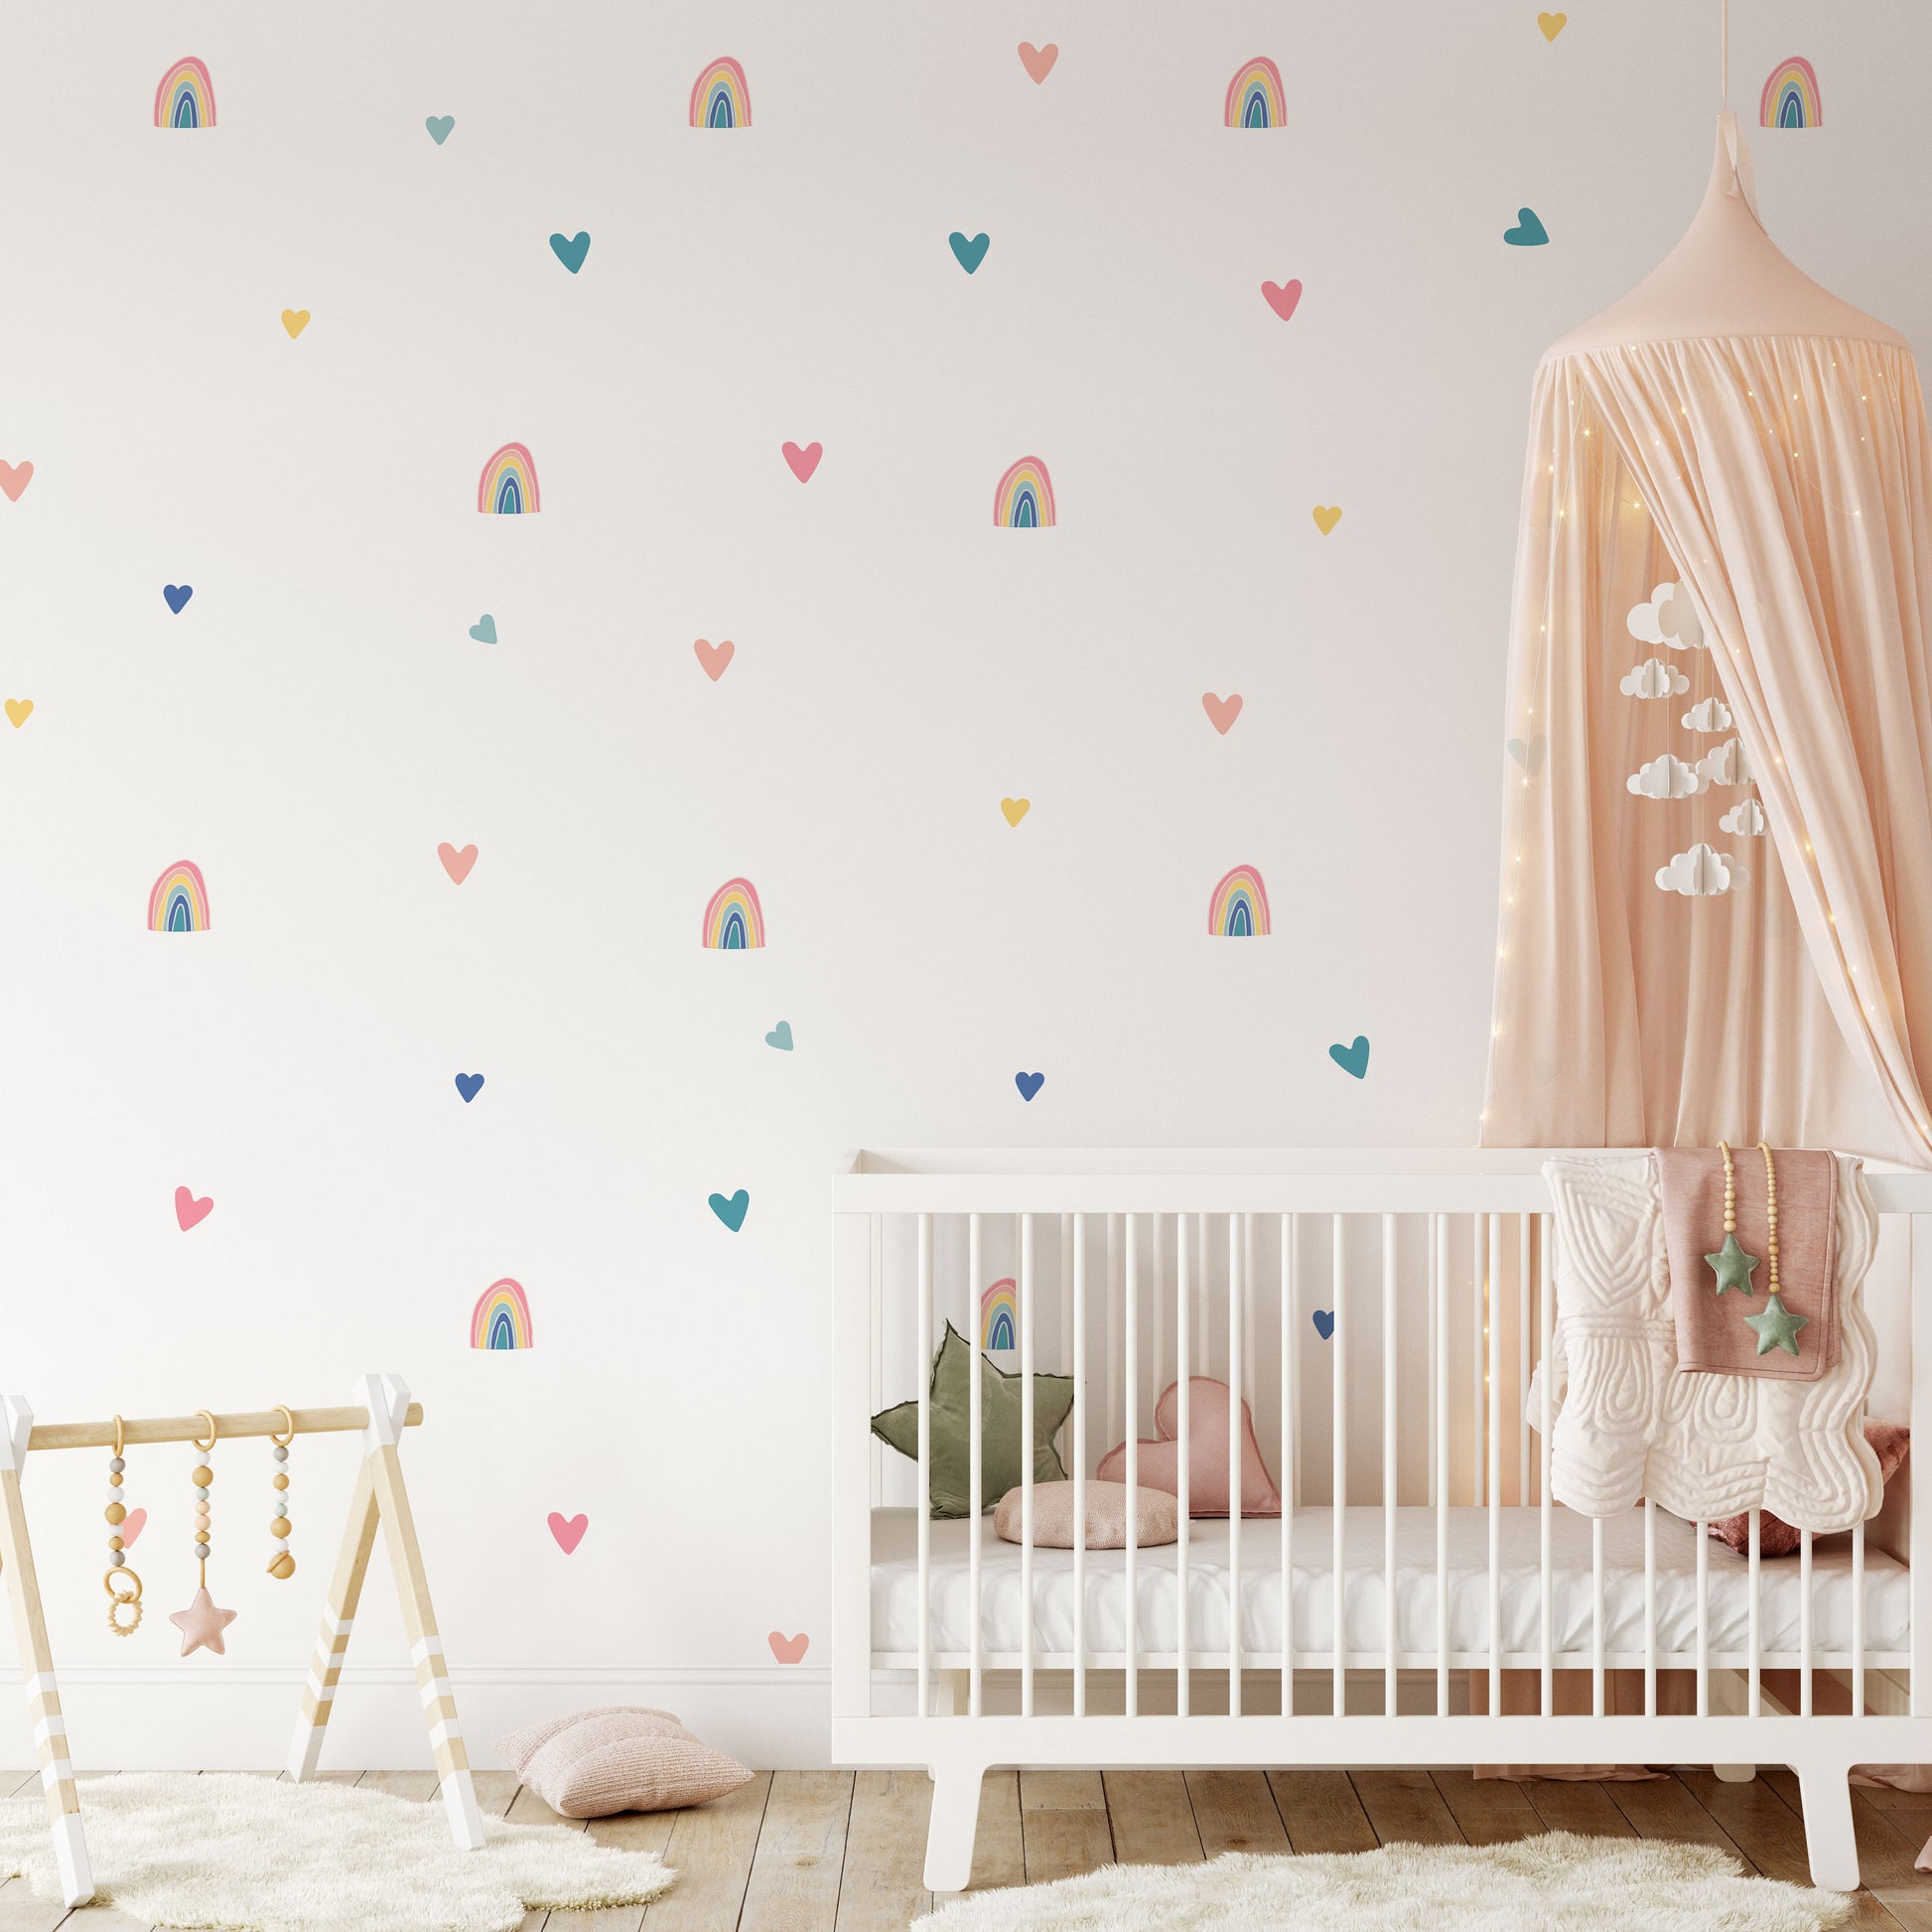 Pastel Wall Stickers For Girls Bedrooms Nursery Heart Rainbow Wall Stickers Decals For Childrens Room Decor